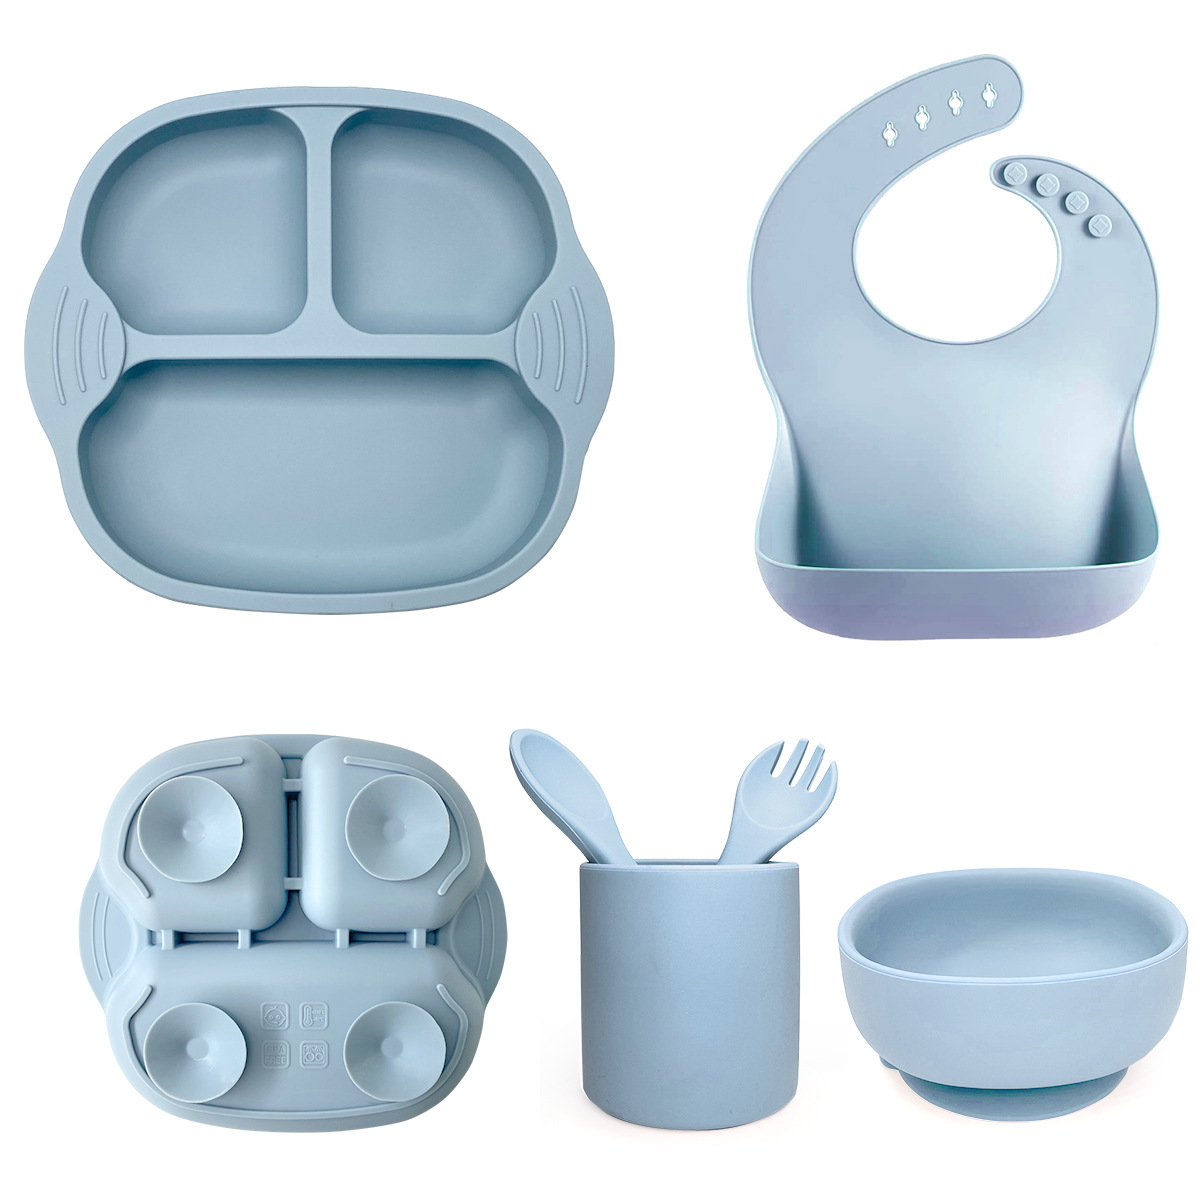 Baby Led Weaning Supplies - Silicone Baby Feeding Set - Suction